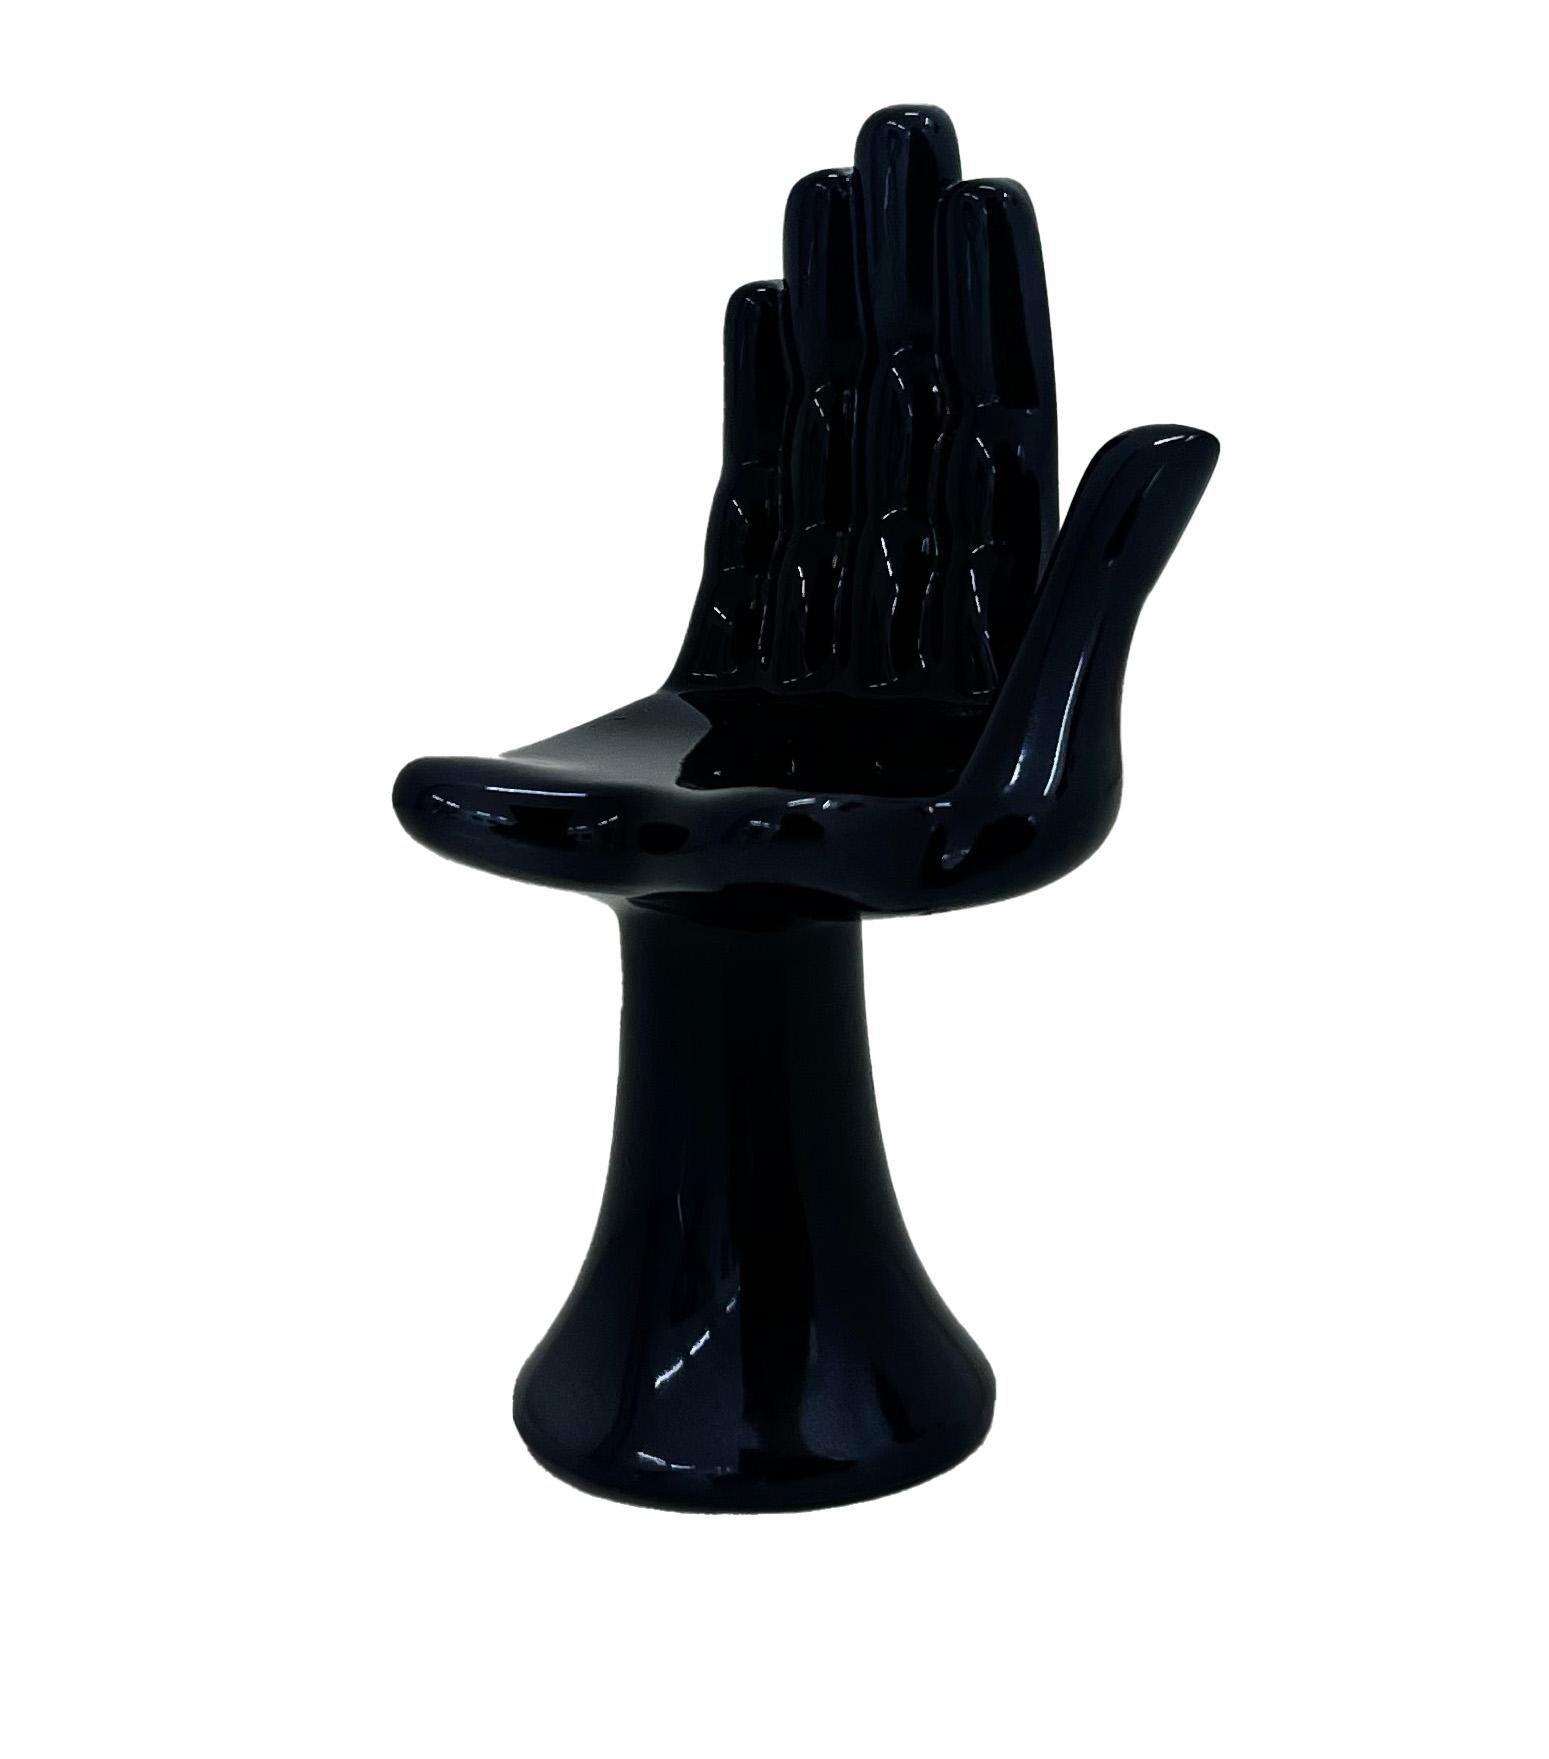 Pedro Friedeberg Figurative Sculpture - "Mano" - Mini version of Hand Chair by Friedeberg, sculpture, colored, black